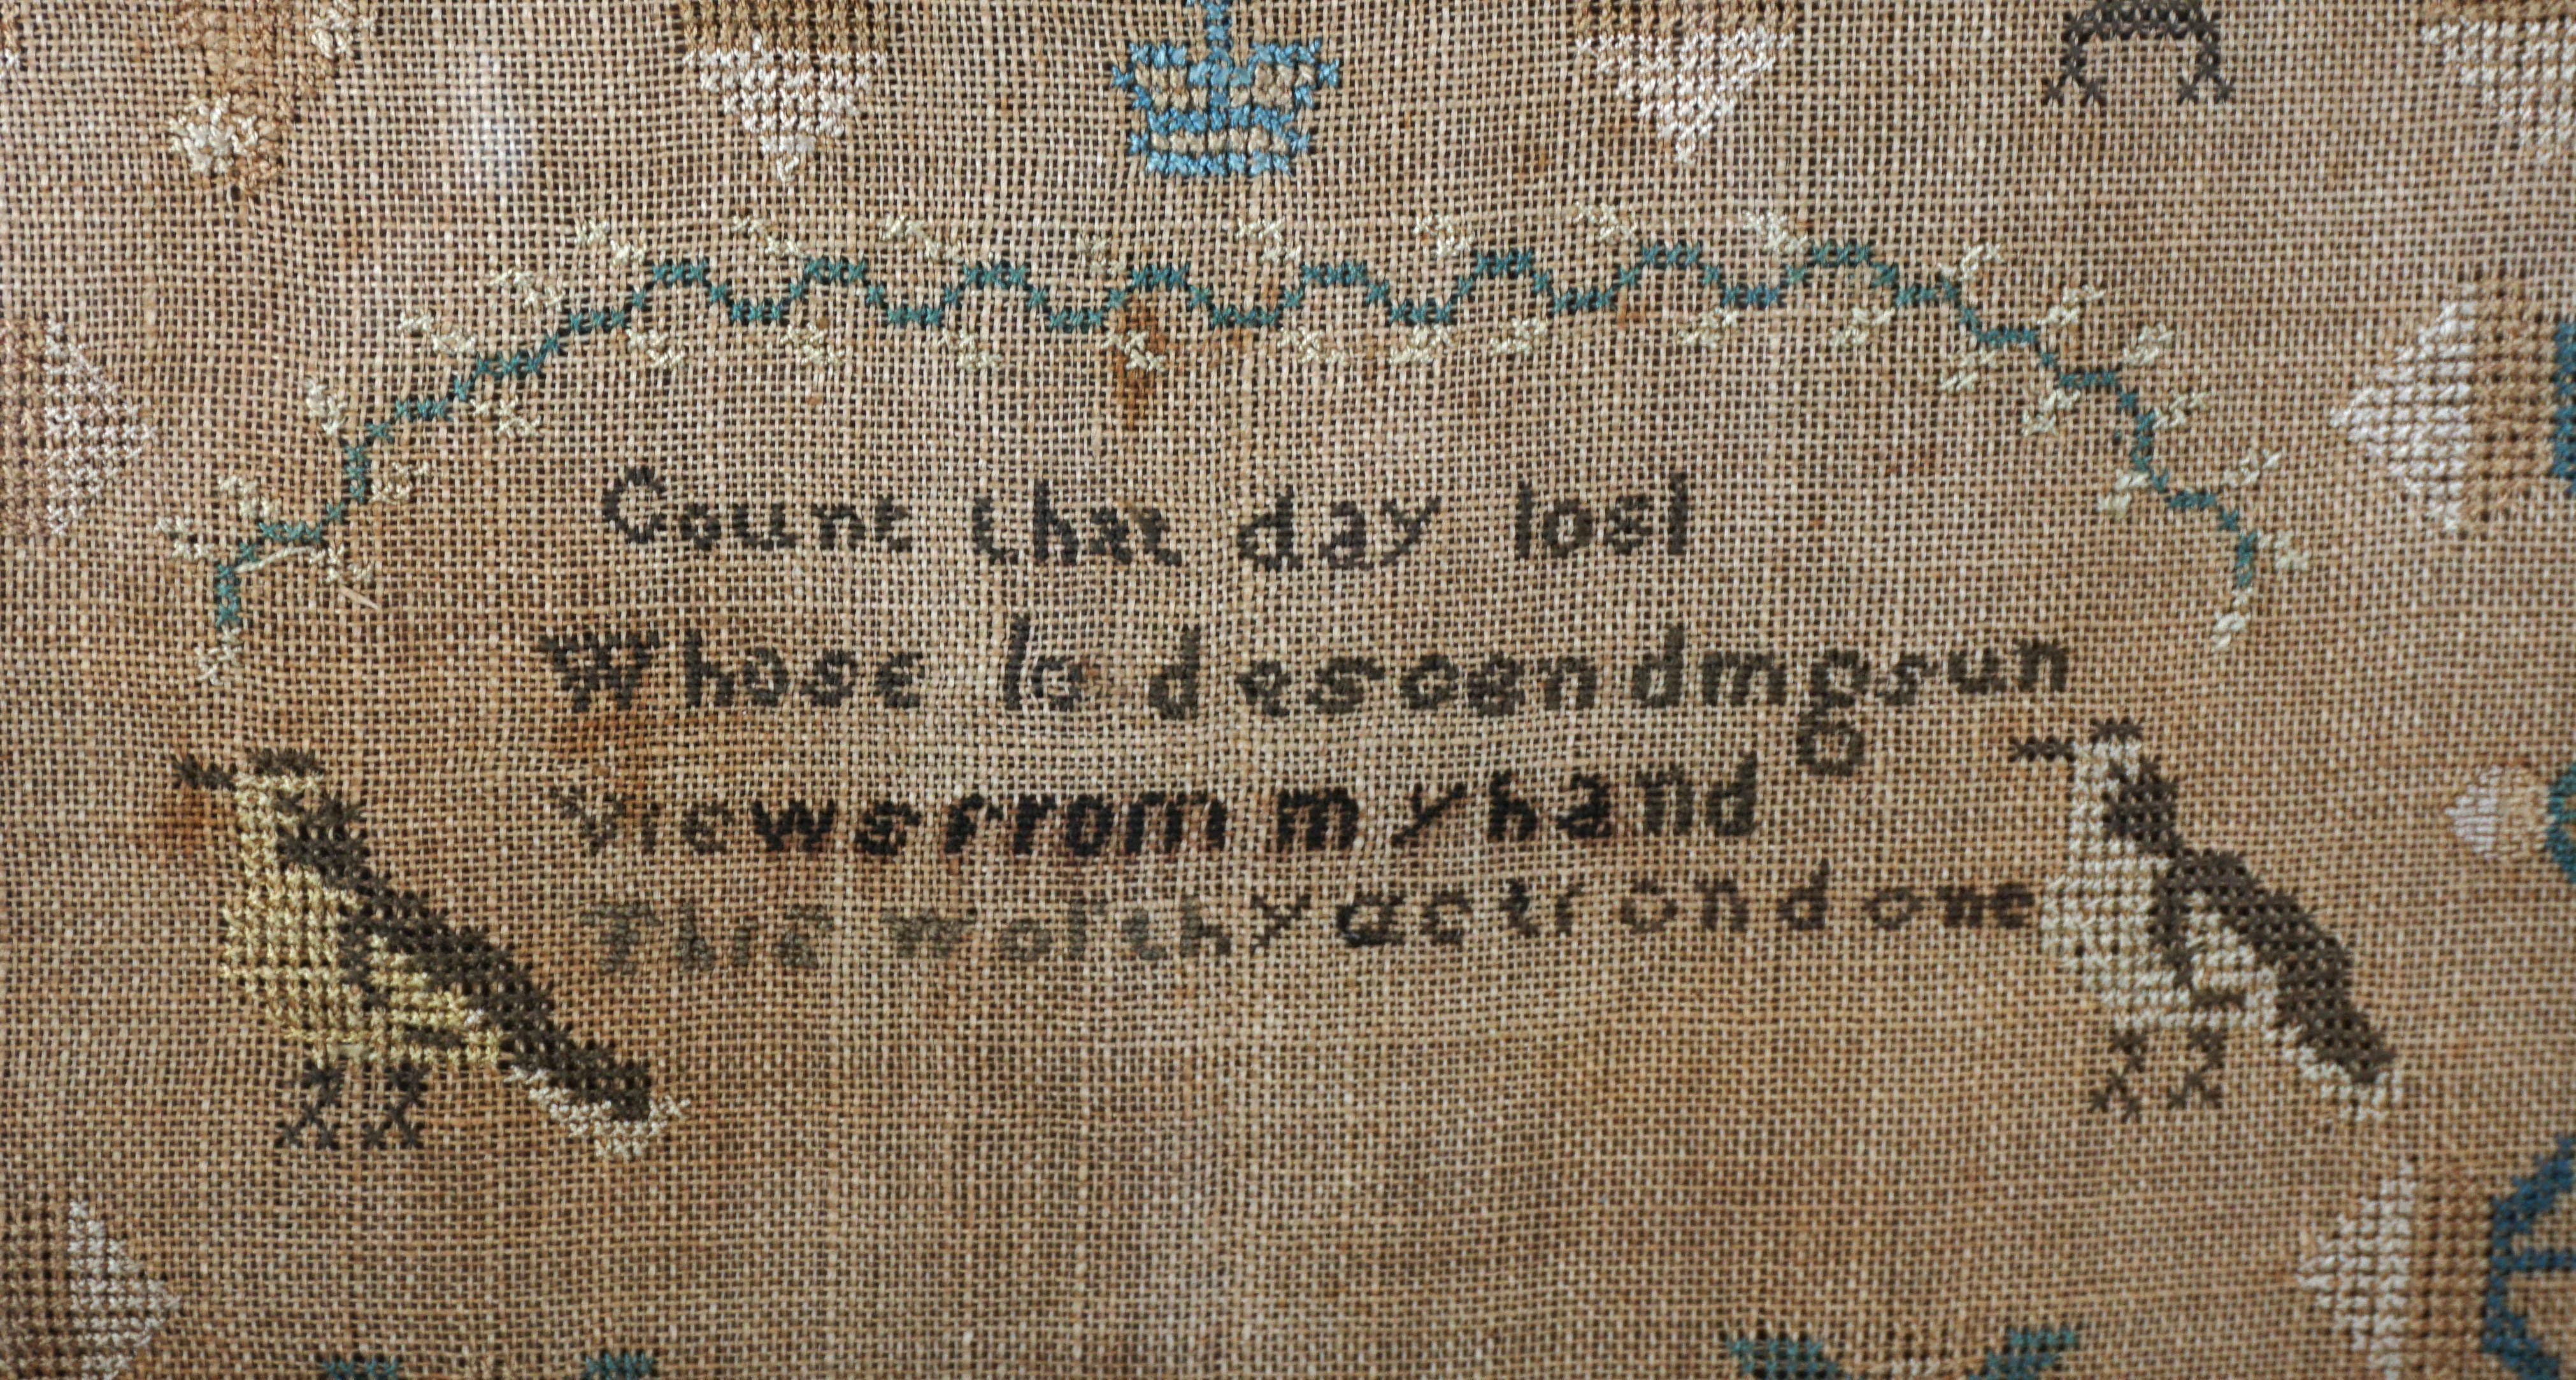 Wonderful 1820's needlepoint by 12 year-old Ellen Roberts (American, b. 1817 - ?) of New York with flower boarder and quote: 
    Count that day lost 
    whose low descending sun. 
    Views from thy hand 
    no worthy action done.

Condition: